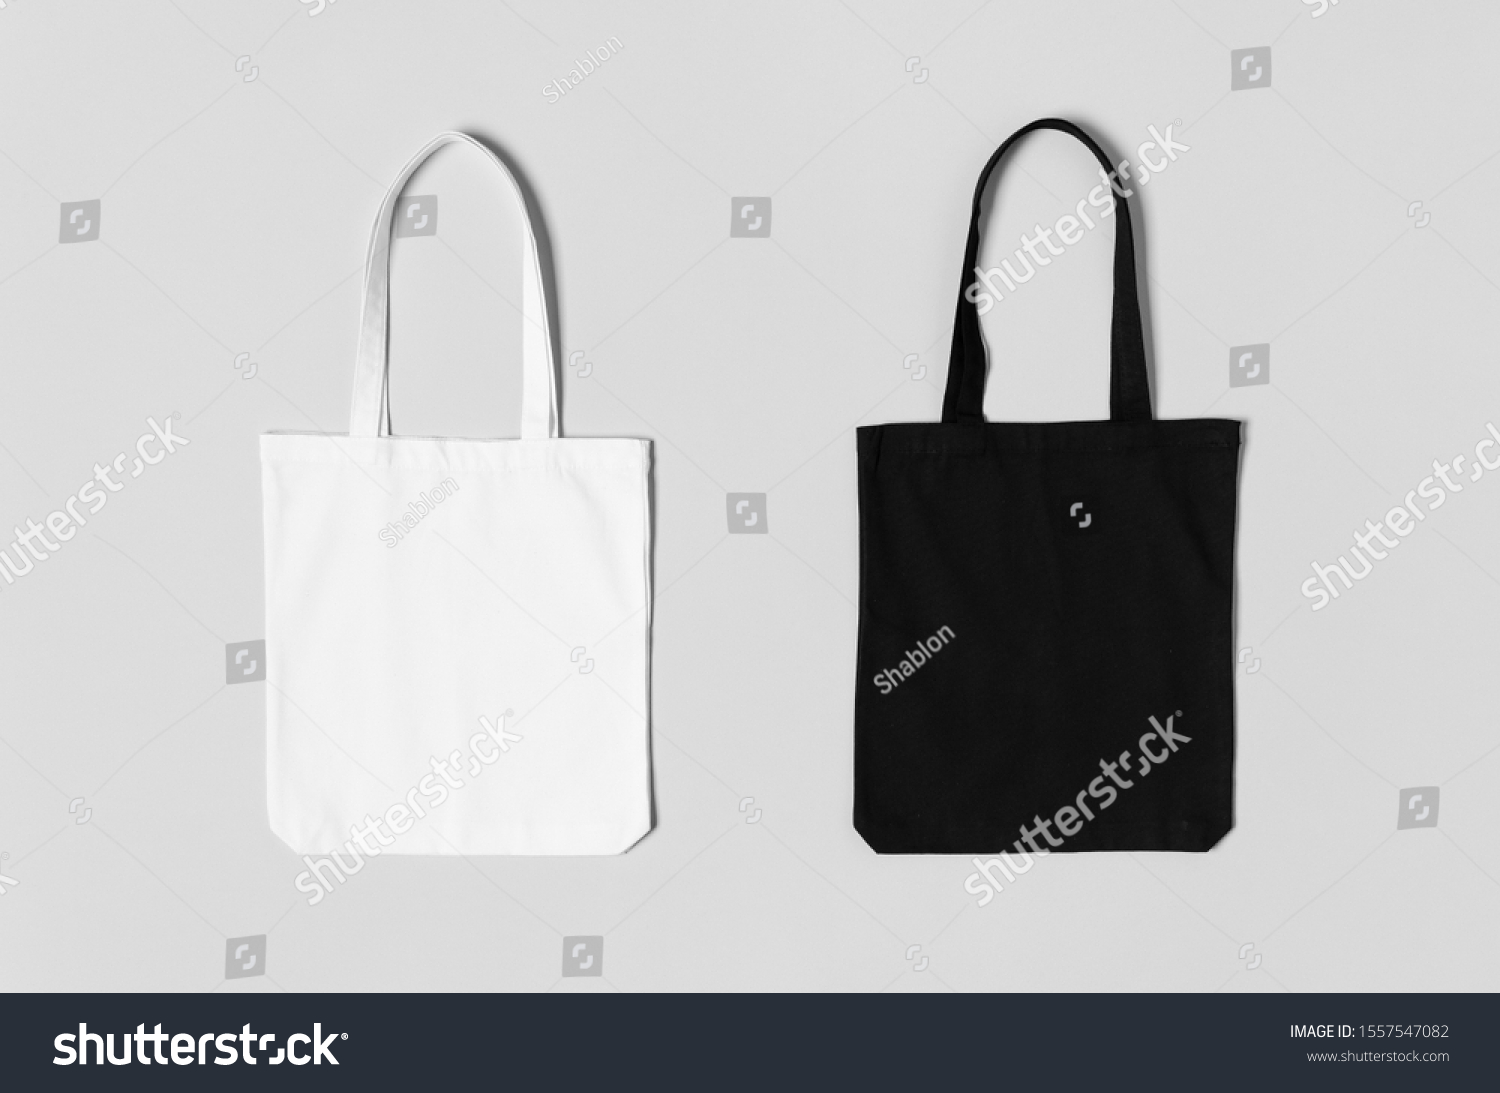 White and black tote bags mockup on a grey background. #1557547082